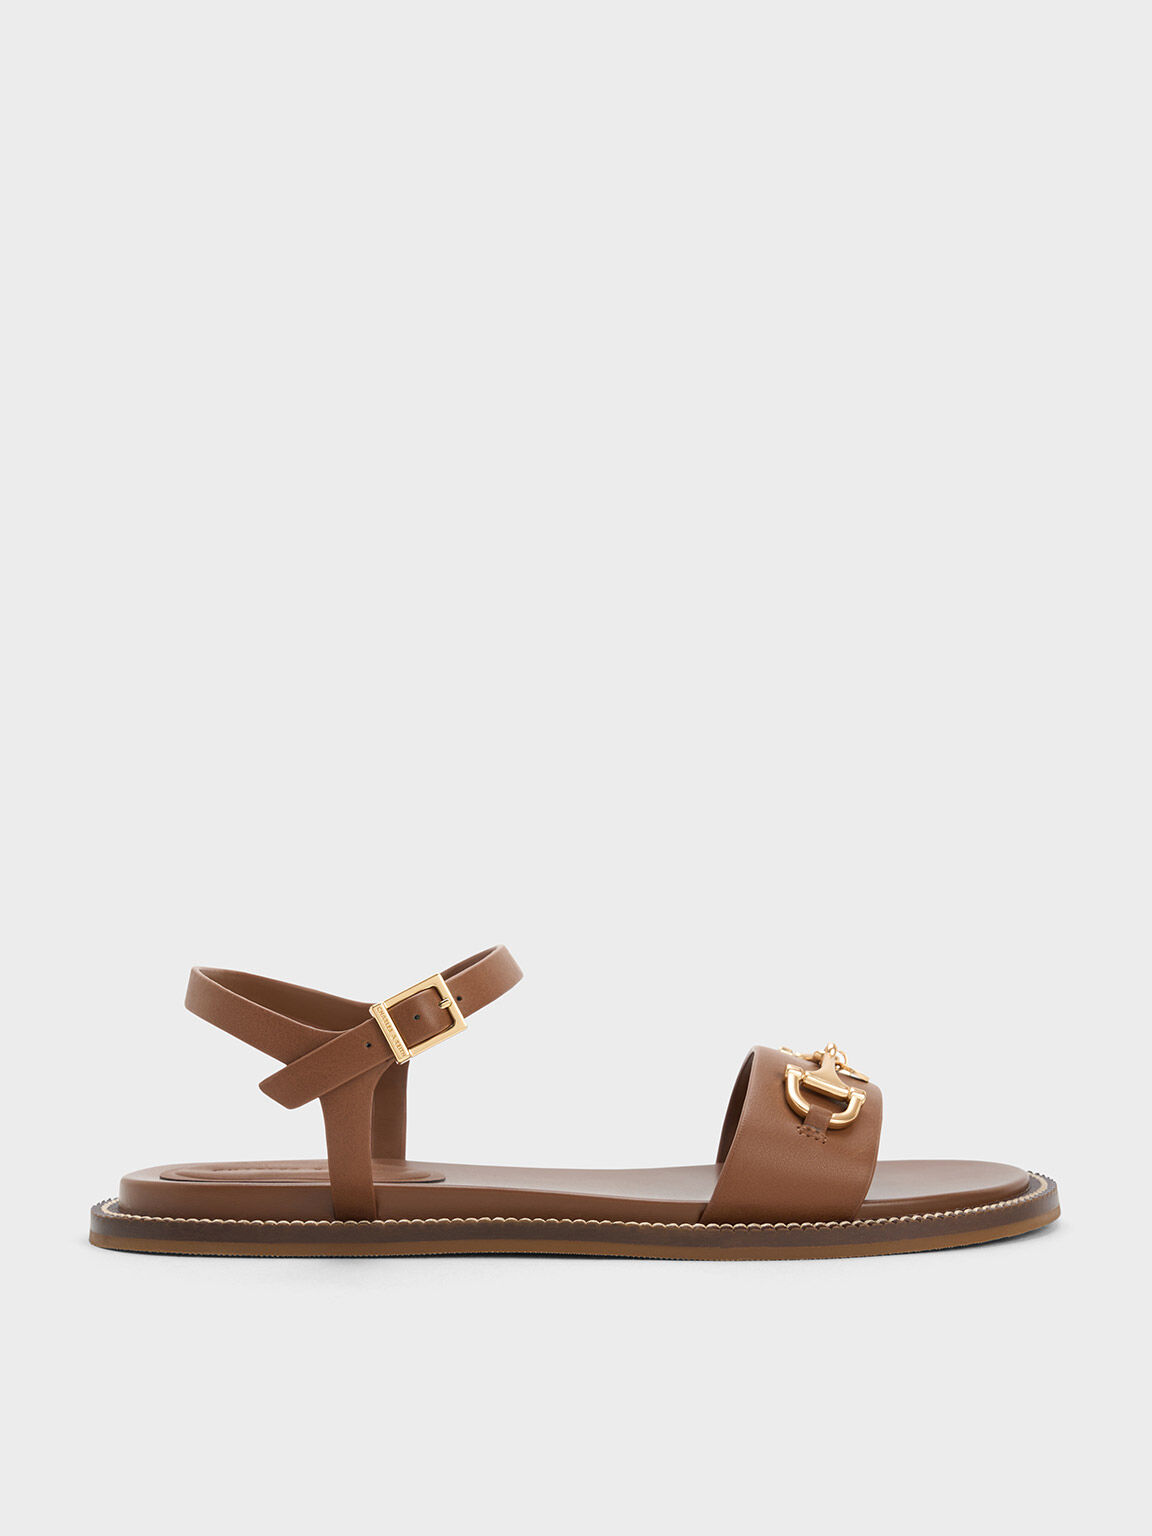 Capri Strap Sandals of Tory Burch - Brown leather toe thong sandals with  baroque logo for women